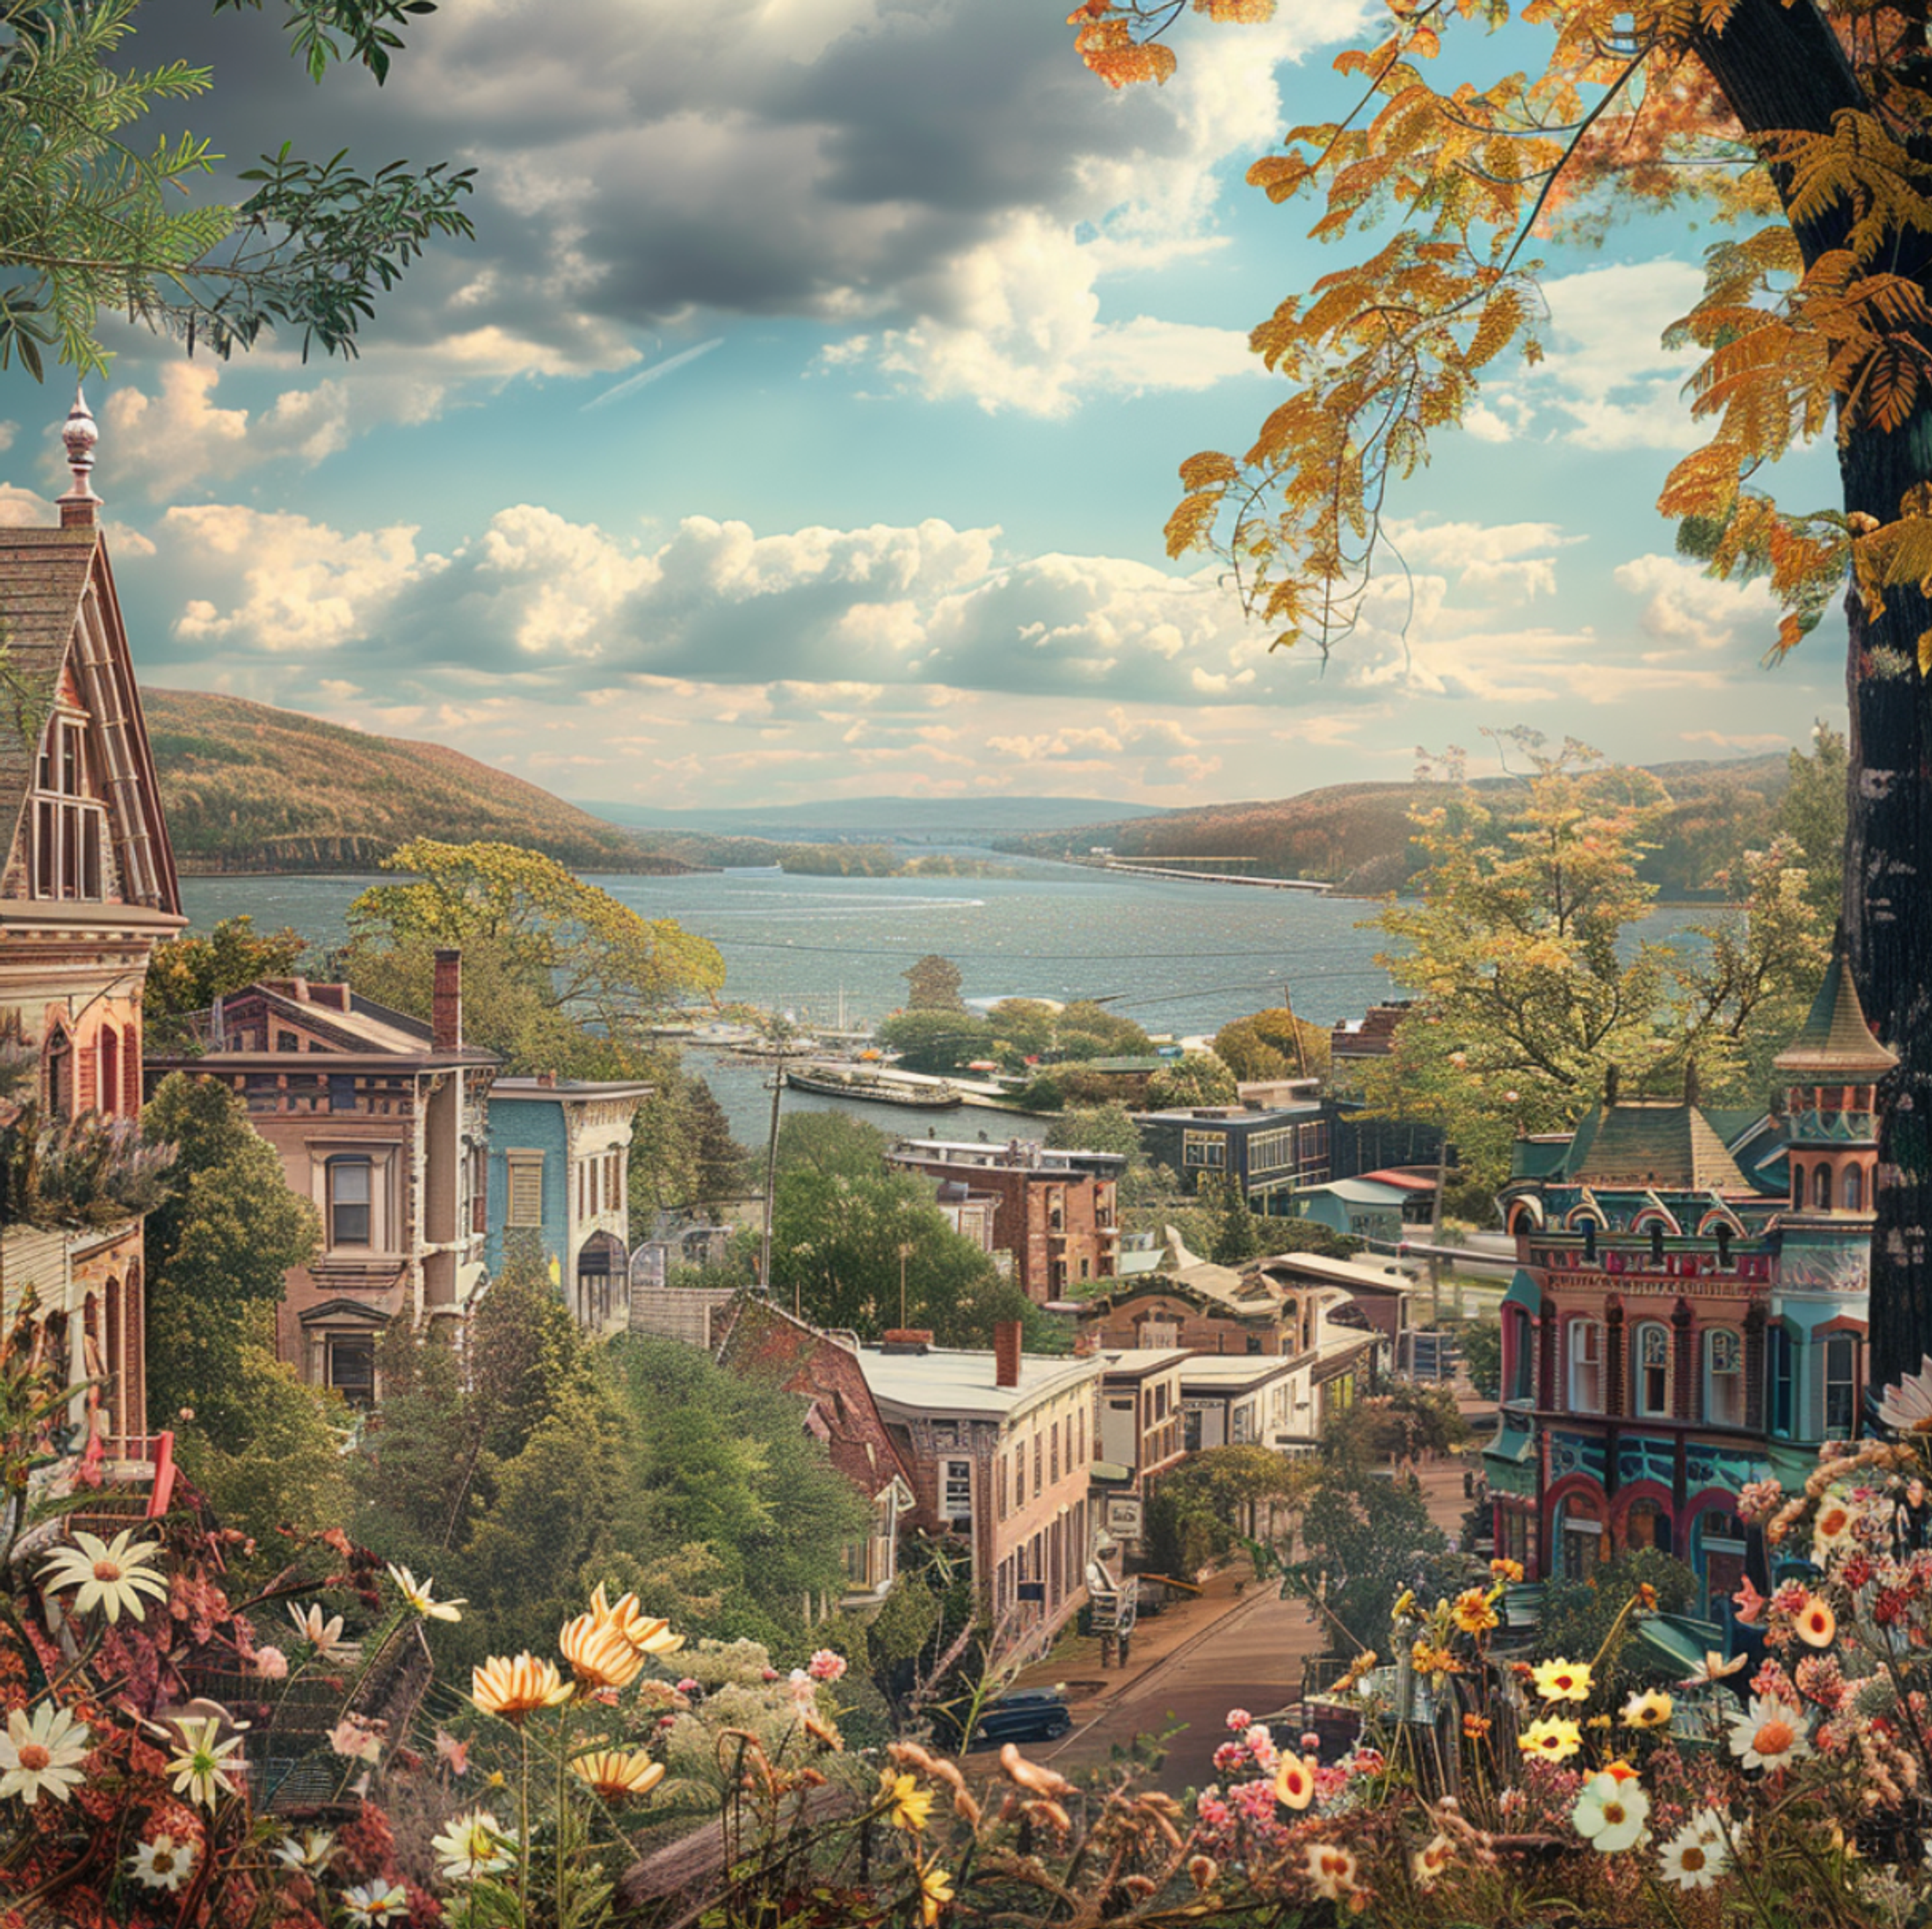 Autumnal beauty in Hudson, NY, with historic architecture lining the streets, leading to a view of the Hudson River surrounded by fall foliage, complemented by an array of wildflowers in the foreground, perfect for capturing the essence of local flower delivery.